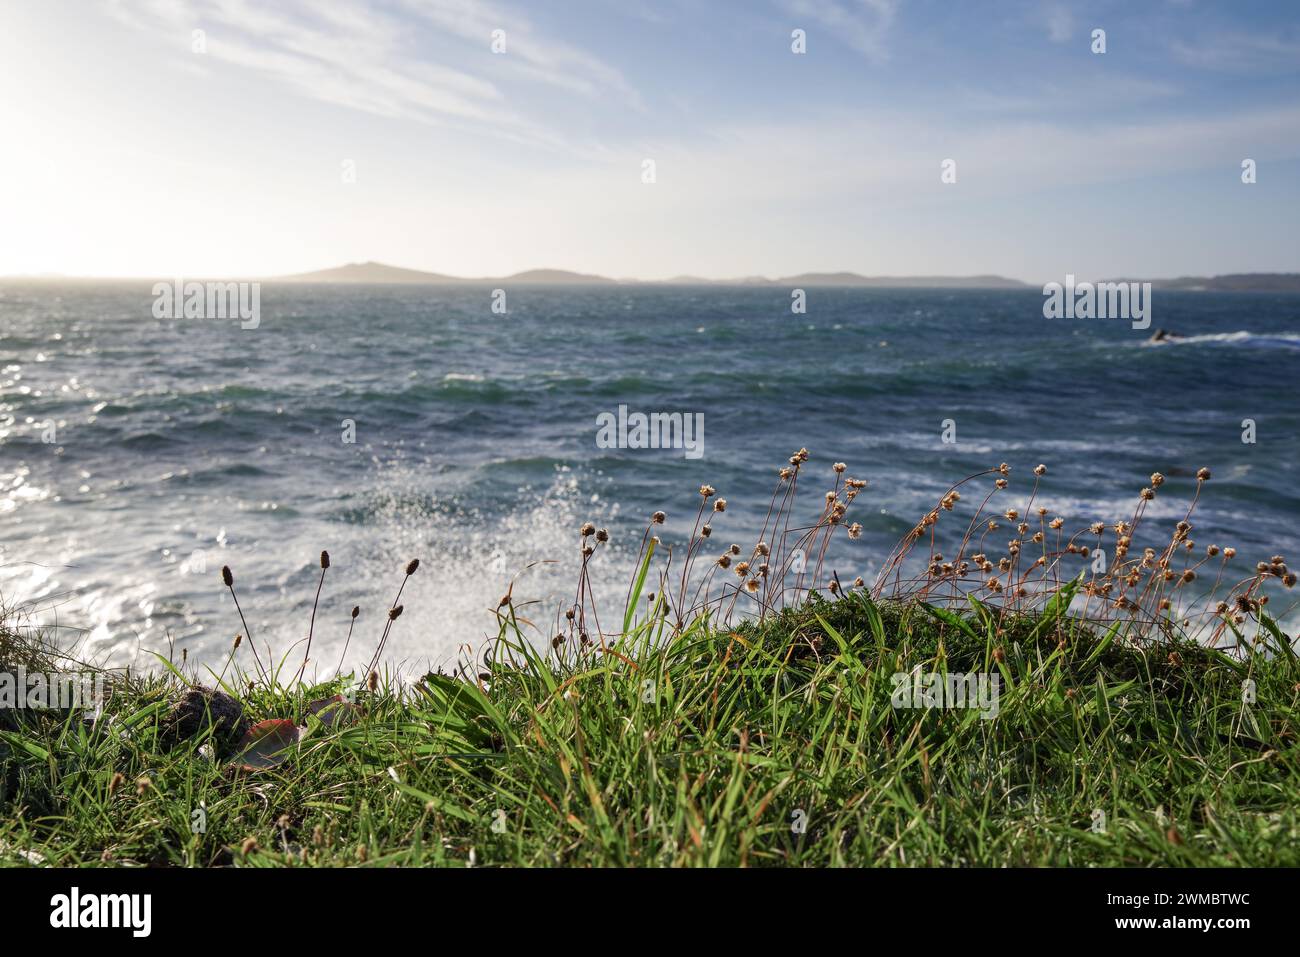 Samson and Tresco at dusk - view of the islands from St Mary's (Isles of Scilly, UK) Stock Photo